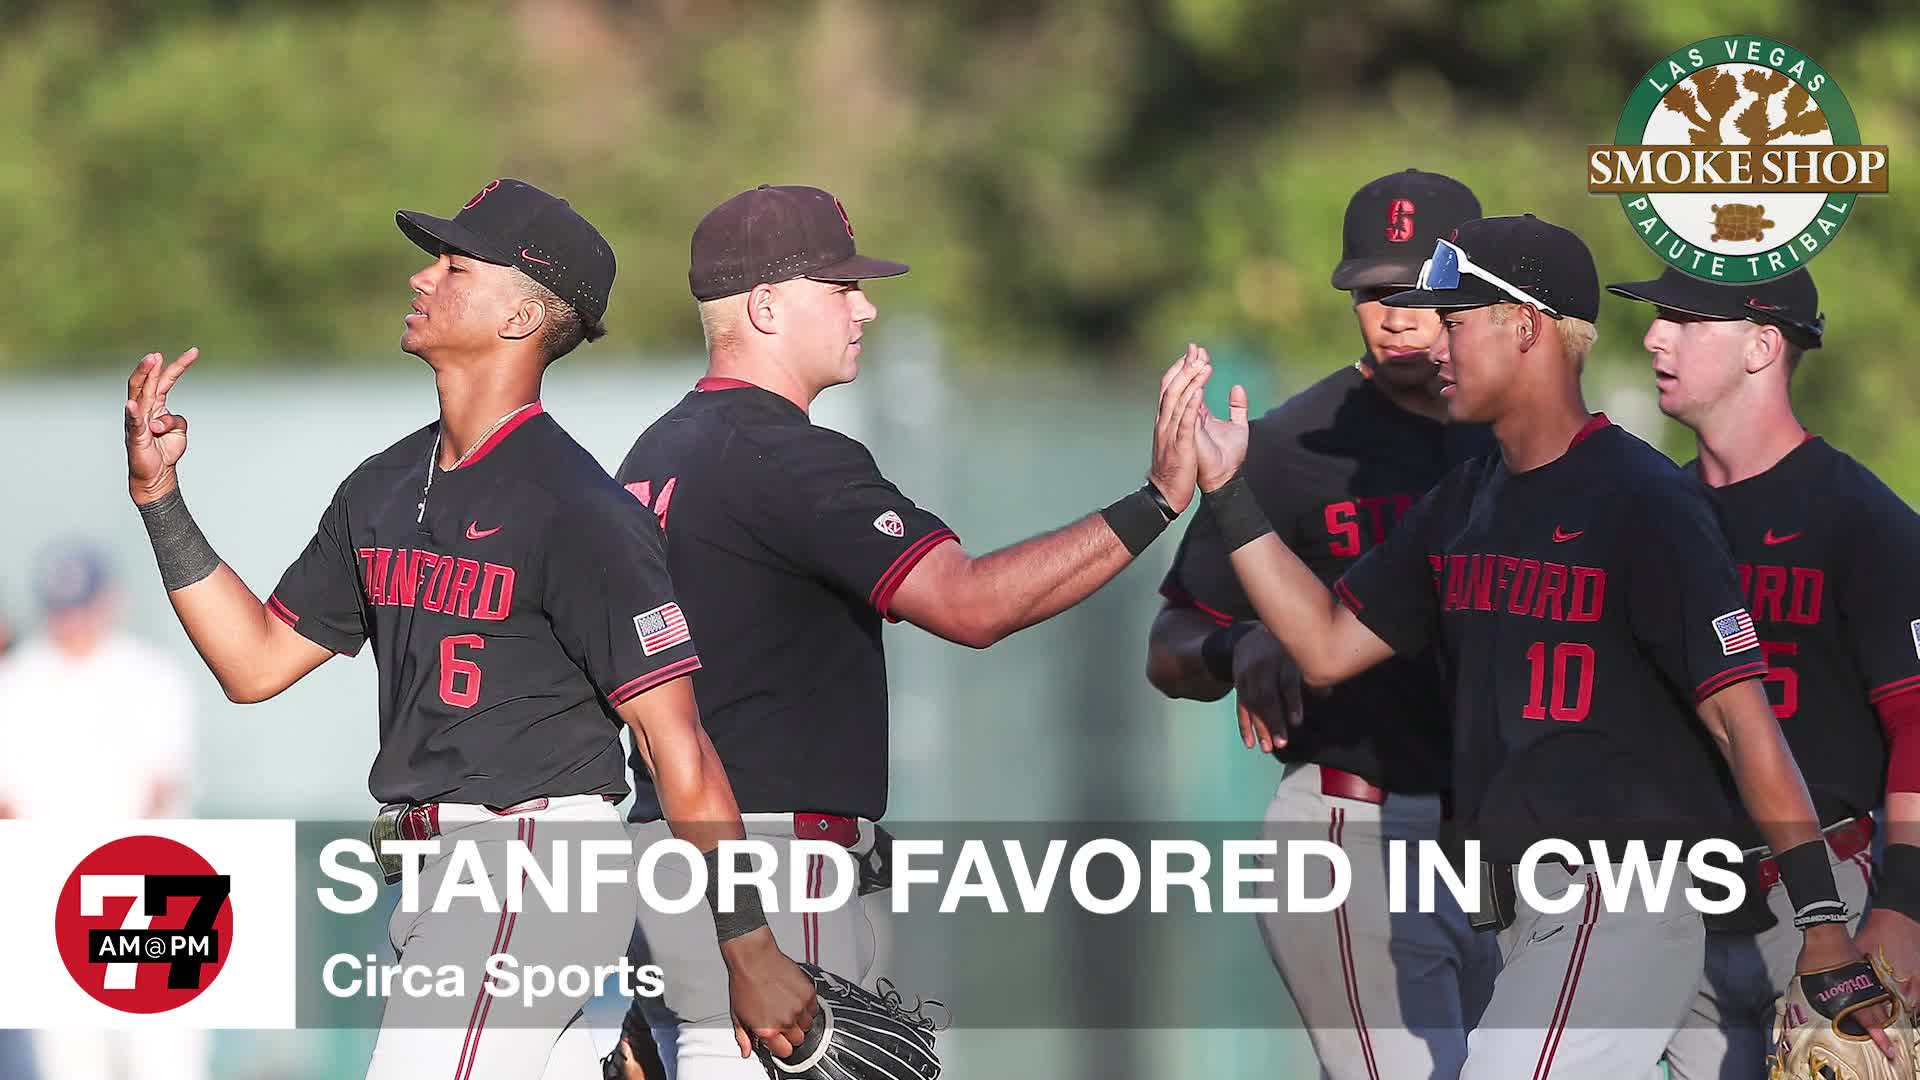 Stanford Favored in CWS